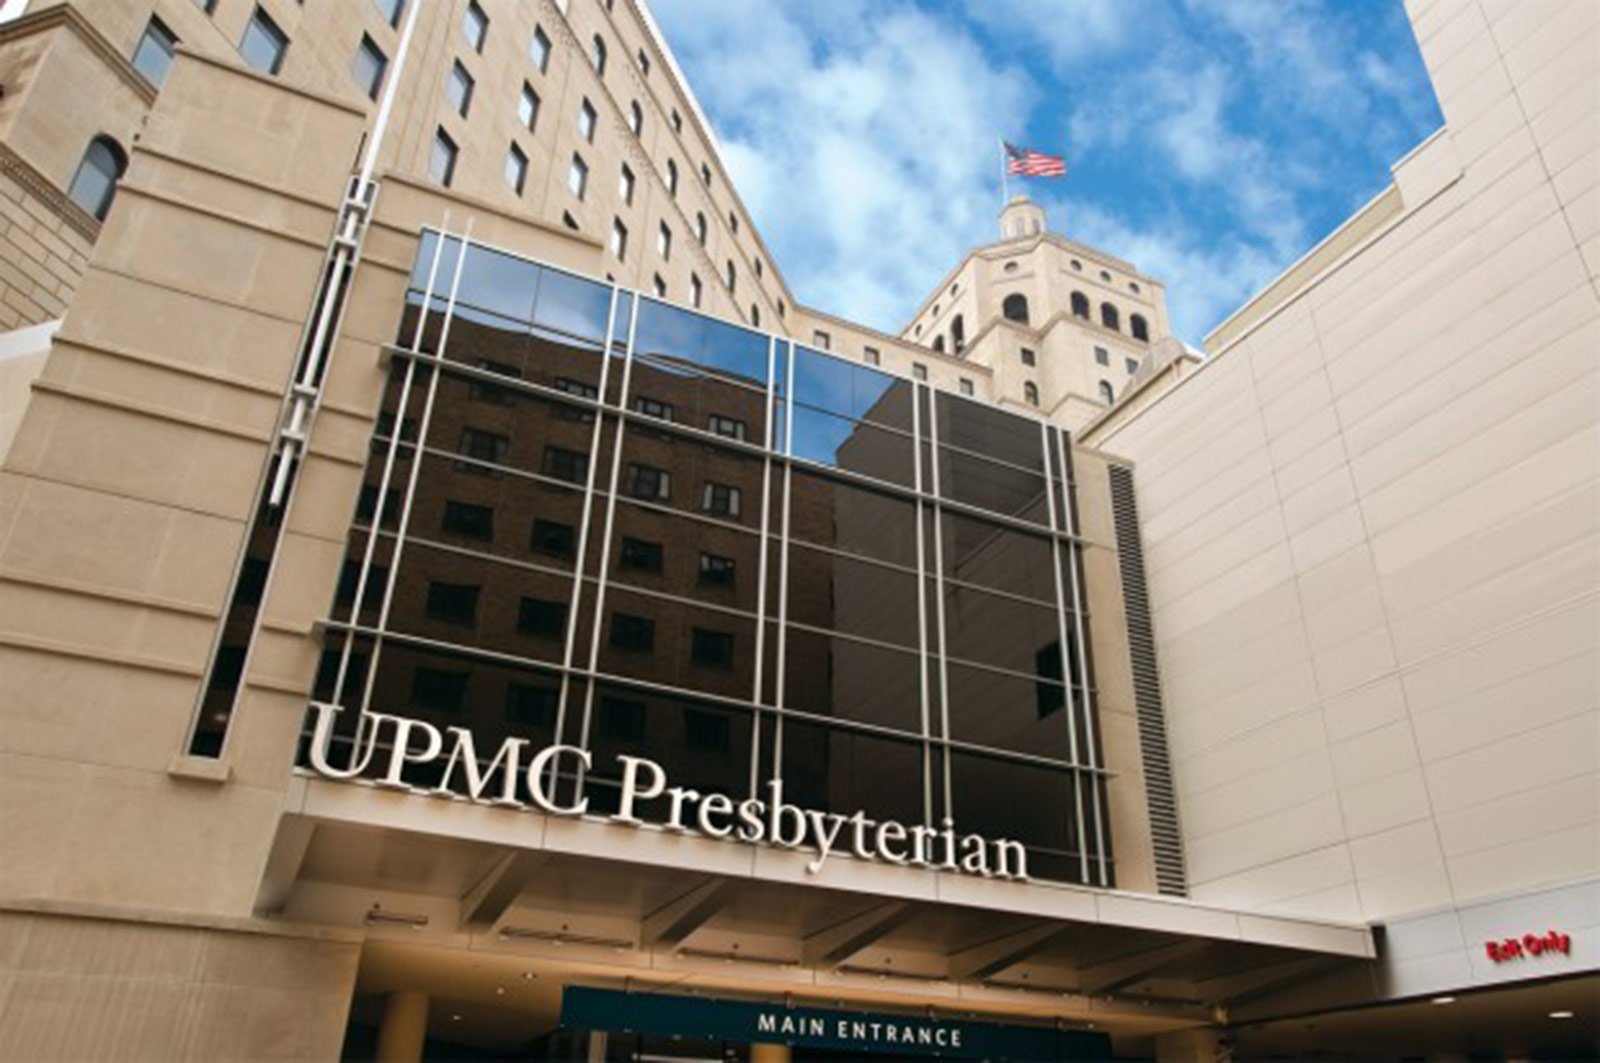 The likely source of a deadly mold outbreak that started in 2014 at University of Pittsburgh Medical Center hospitals was the hospitals' linen provider, according to findings shared in emails exclusively obtained by CNN.